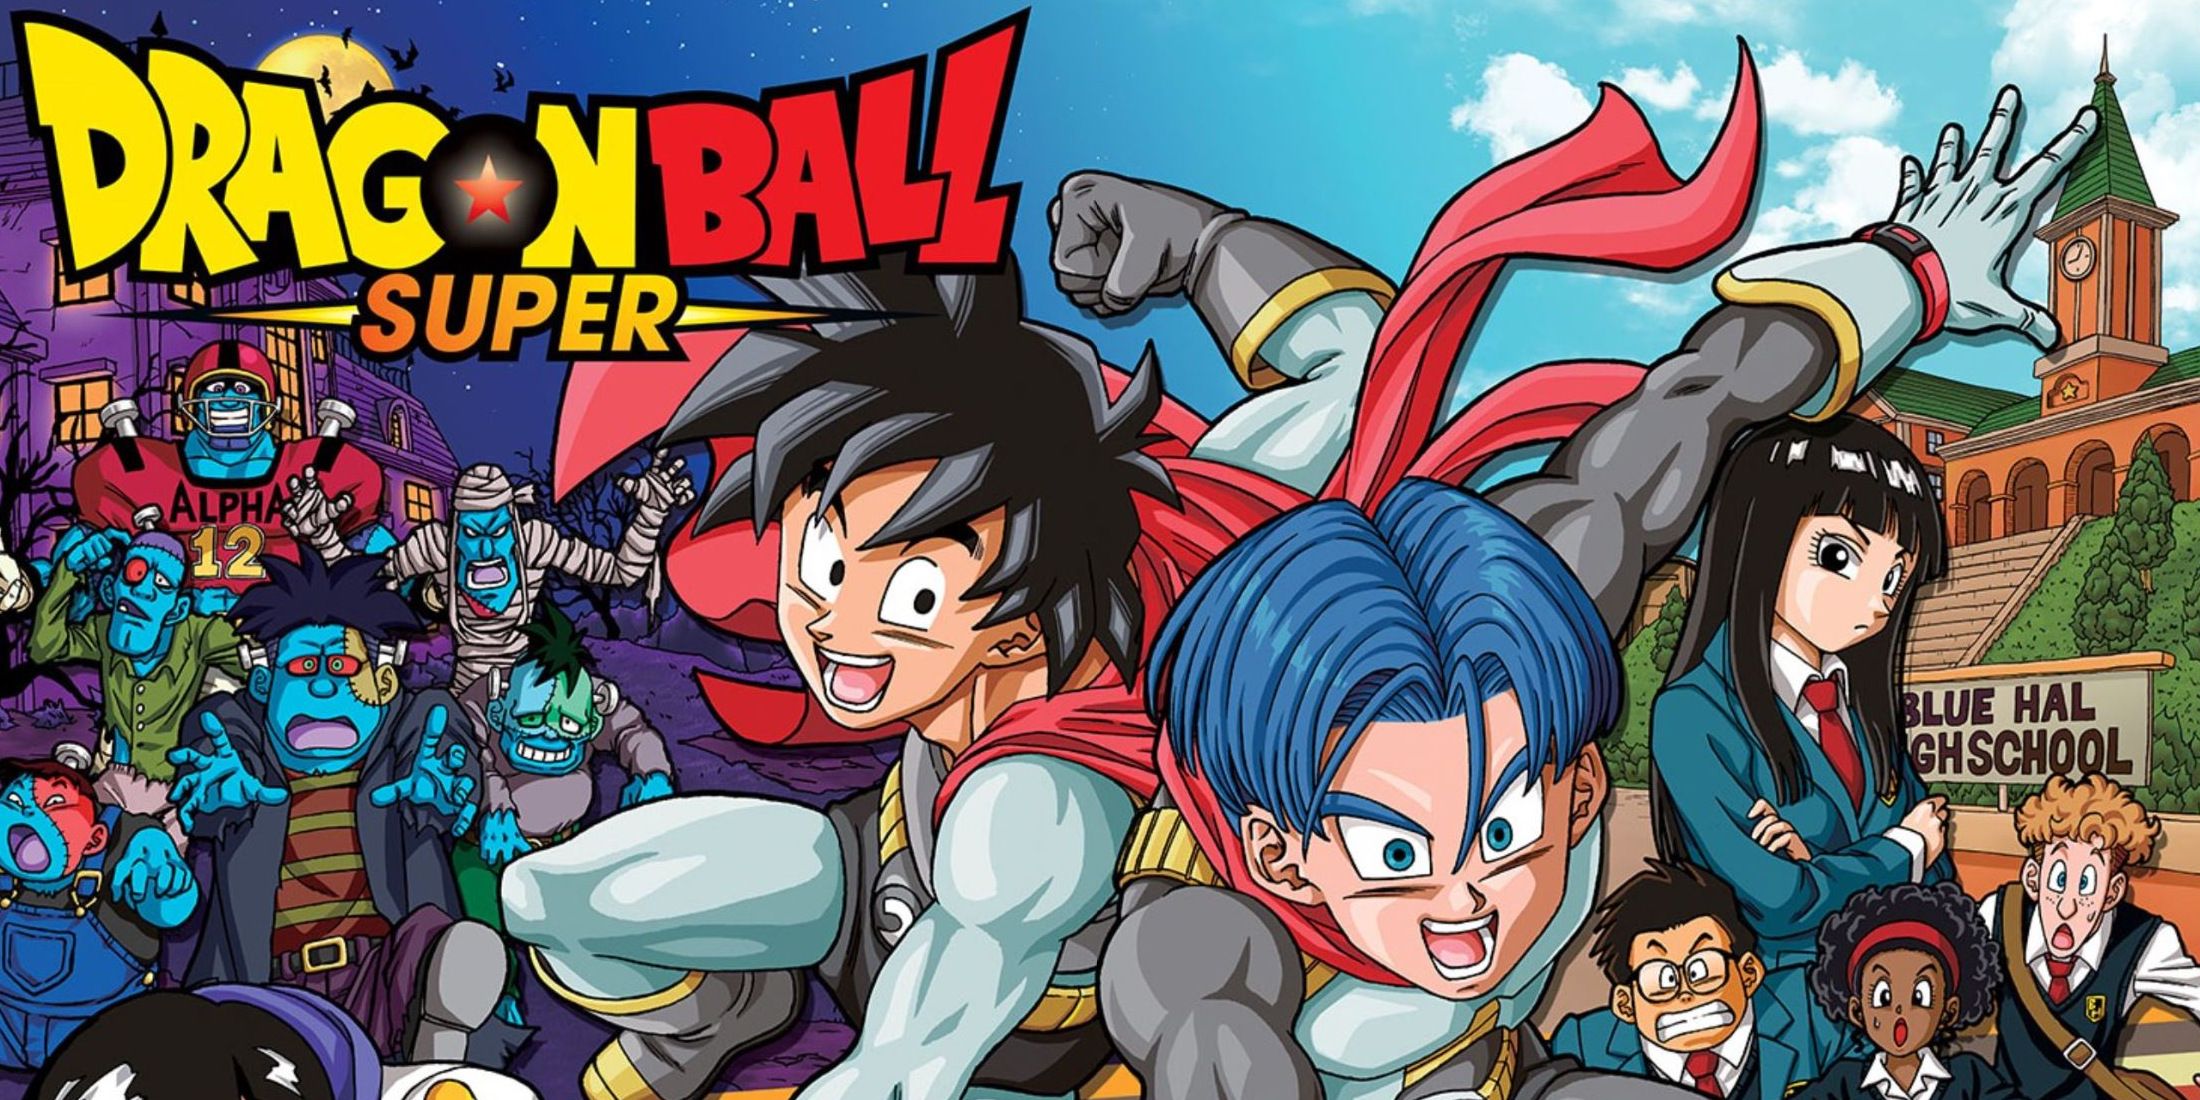 Goten and Trunks in their Saiyaman gear flanked by zombies, Mai, and fellow high school students in the Dragon Ball Super manga